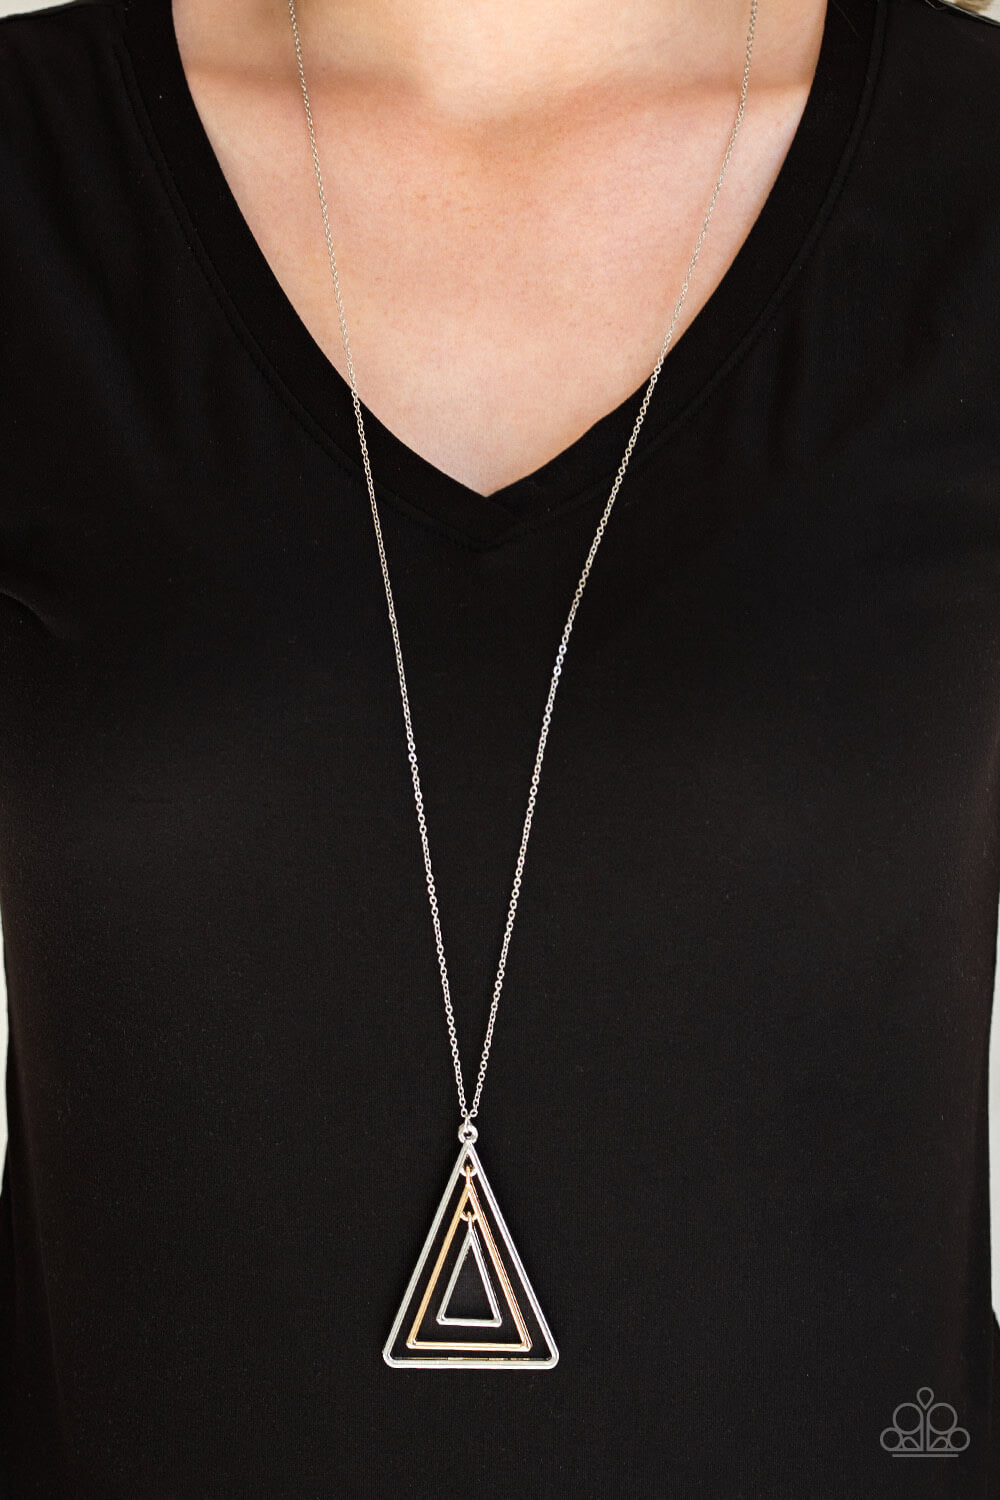 Paparazzi “TRI-Harder” Gold and Silver Triangular Pendant Necklace